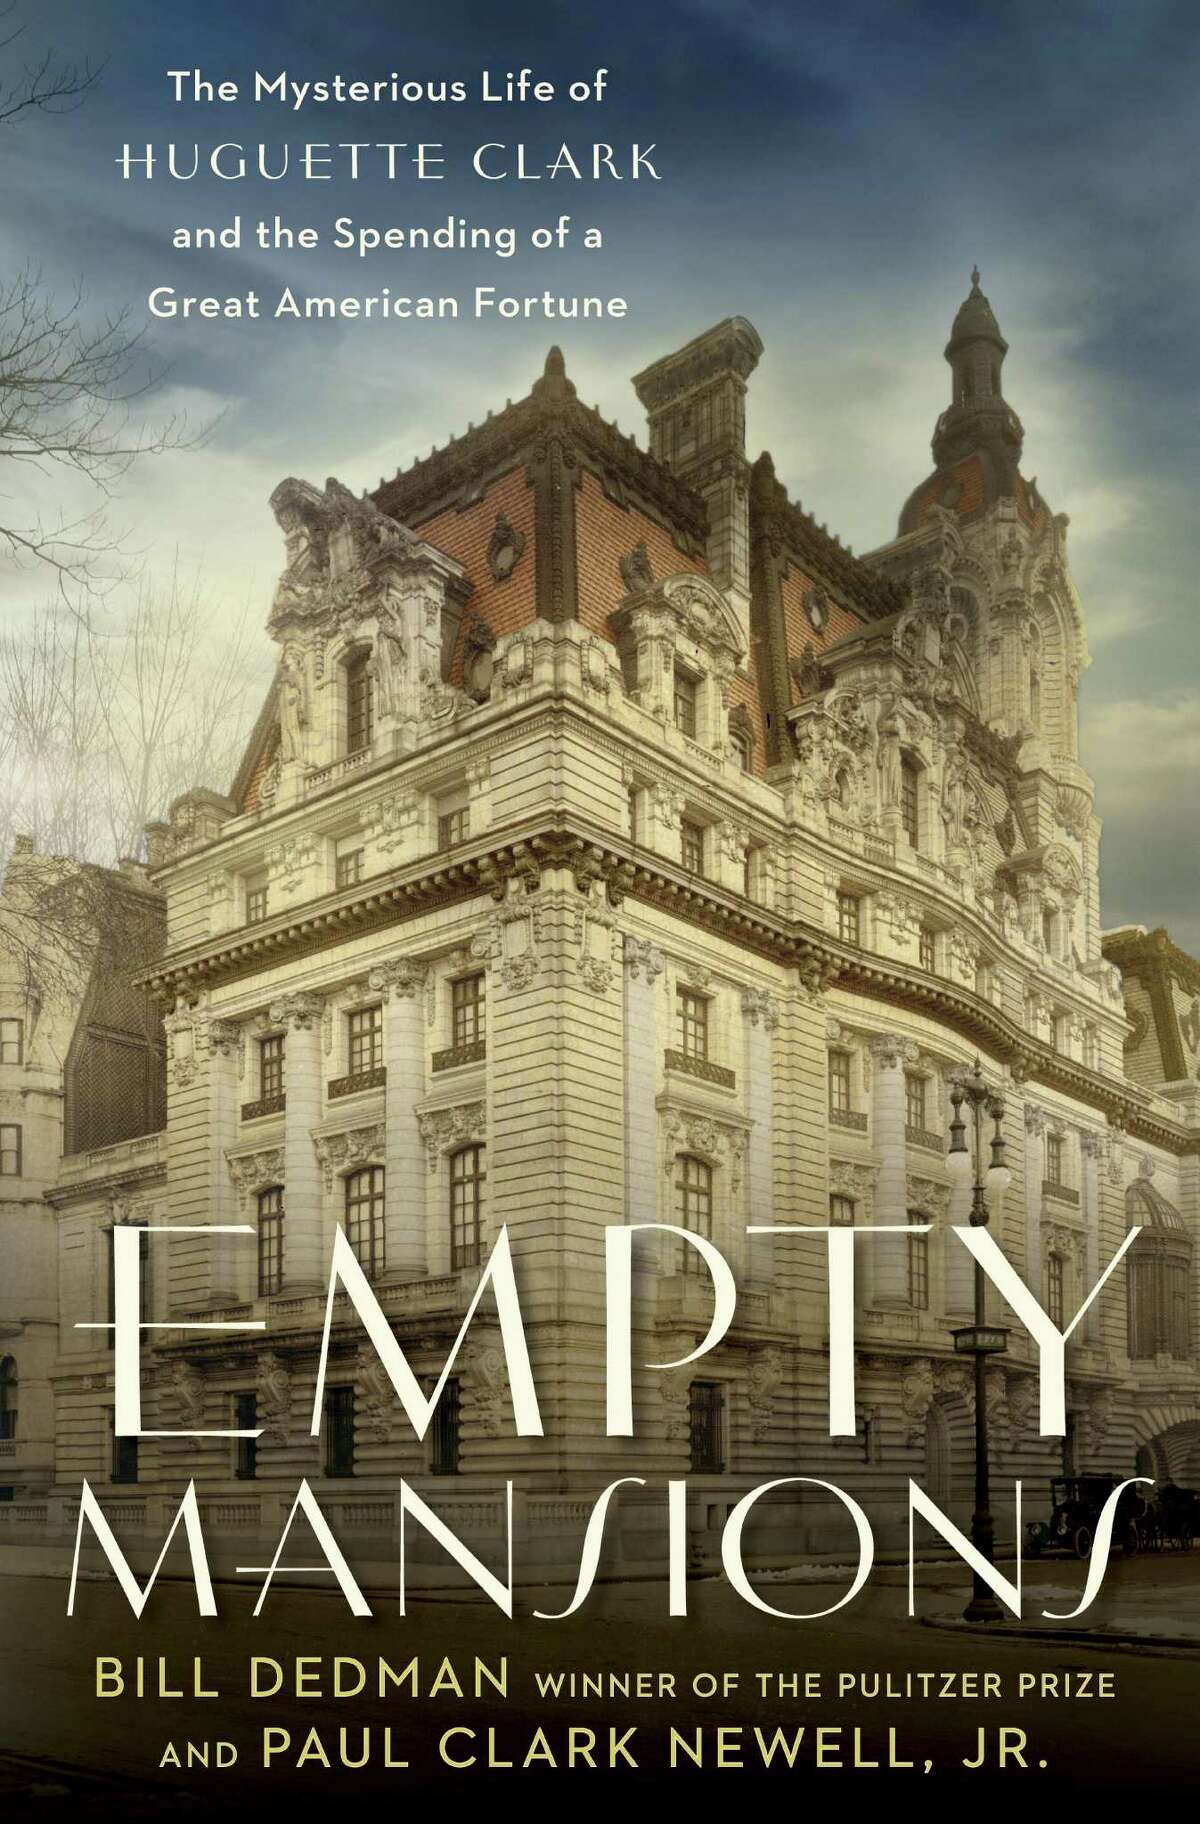 The cover of the book, Empty Mansions: The Mysterious Life of Huguette Clark and the Spending of a Great American Fortune by Bill Dedman and Paul Clark Newell, Jr.